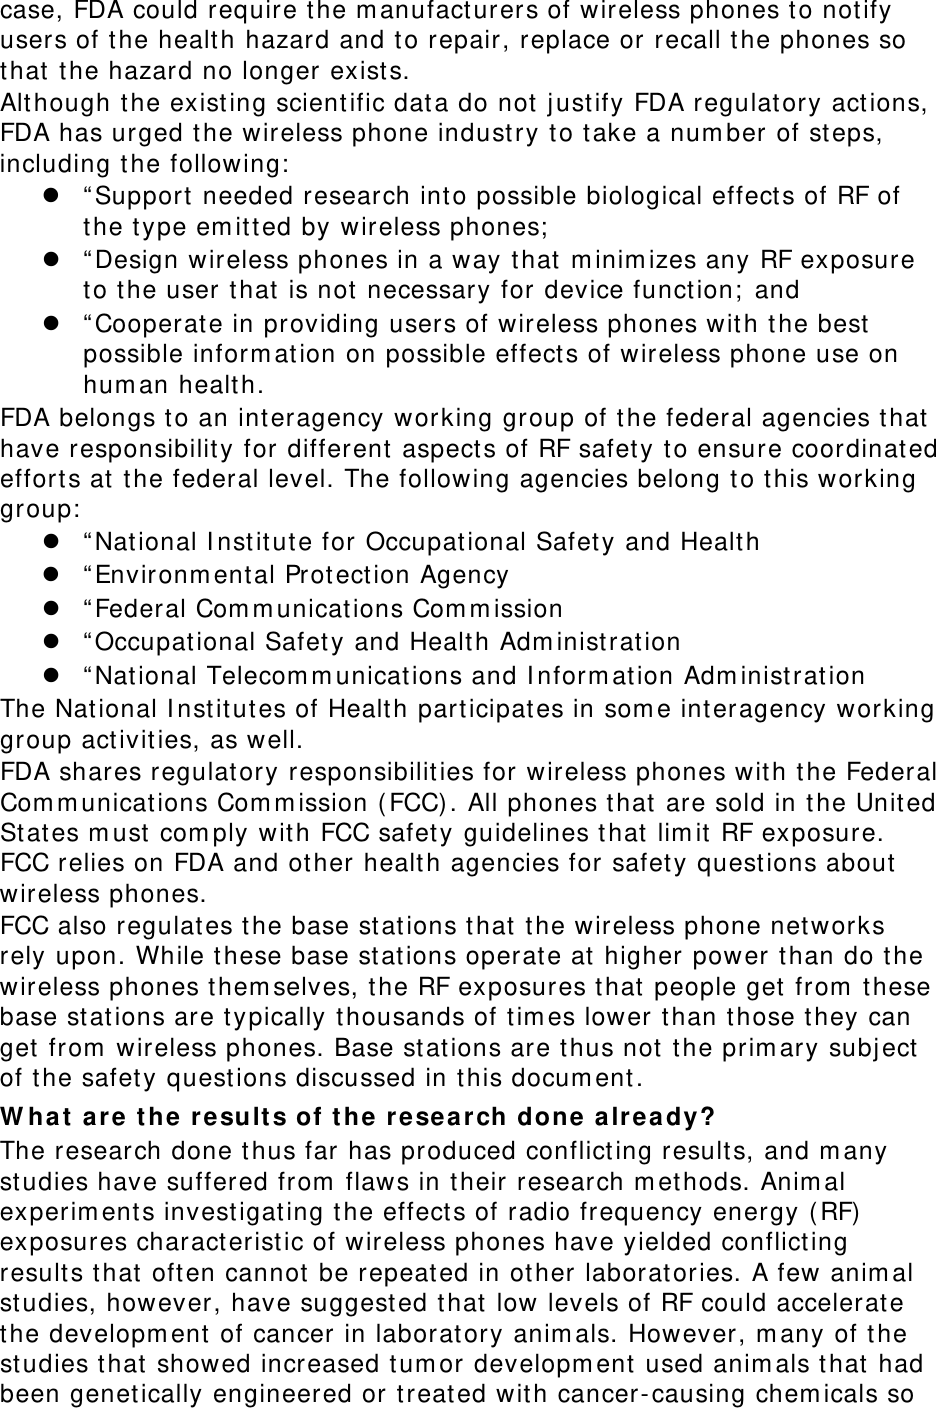 case, FDA could require the manufacturers of wireless phones to notify users of the health hazard and to repair, replace or recall the phones so that the hazard no longer exists. Although the existing scientific data do not justify FDA regulatory actions, FDA has urged the wireless phone industry to take a number of steps, including the following:  “Support needed research into possible biological effects of RF of the type emitted by wireless phones;  “Design wireless phones in a way that minimizes any RF exposure to the user that is not necessary for device function; and  “Cooperate in providing users of wireless phones with the best possible information on possible effects of wireless phone use on human health. FDA belongs to an interagency working group of the federal agencies that have responsibility for different aspects of RF safety to ensure coordinated efforts at the federal level. The following agencies belong to this working group:  “National Institute for Occupational Safety and Health  “Environmental Protection Agency  “Federal Communications Commission  “Occupational Safety and Health Administration  “National Telecommunications and Information Administration The National Institutes of Health participates in some interagency working group activities, as well. FDA shares regulatory responsibilities for wireless phones with the Federal Communications Commission (FCC). All phones that are sold in the United States must comply with FCC safety guidelines that limit RF exposure. FCC relies on FDA and other health agencies for safety questions about wireless phones. FCC also regulates the base stations that the wireless phone networks rely upon. While these base stations operate at higher power than do the wireless phones themselves, the RF exposures that people get from these base stations are typically thousands of times lower than those they can get from wireless phones. Base stations are thus not the primary subject of the safety questions discussed in this document. What are the results of the research done already? The research done thus far has produced conflicting results, and many studies have suffered from flaws in their research methods. Animal experiments investigating the effects of radio frequency energy (RF) exposures characteristic of wireless phones have yielded conflicting results that often cannot be repeated in other laboratories. A few animal studies, however, have suggested that low levels of RF could accelerate the development of cancer in laboratory animals. However, many of the studies that showed increased tumor development used animals that had been genetically engineered or treated with cancer-causing chemicals so 